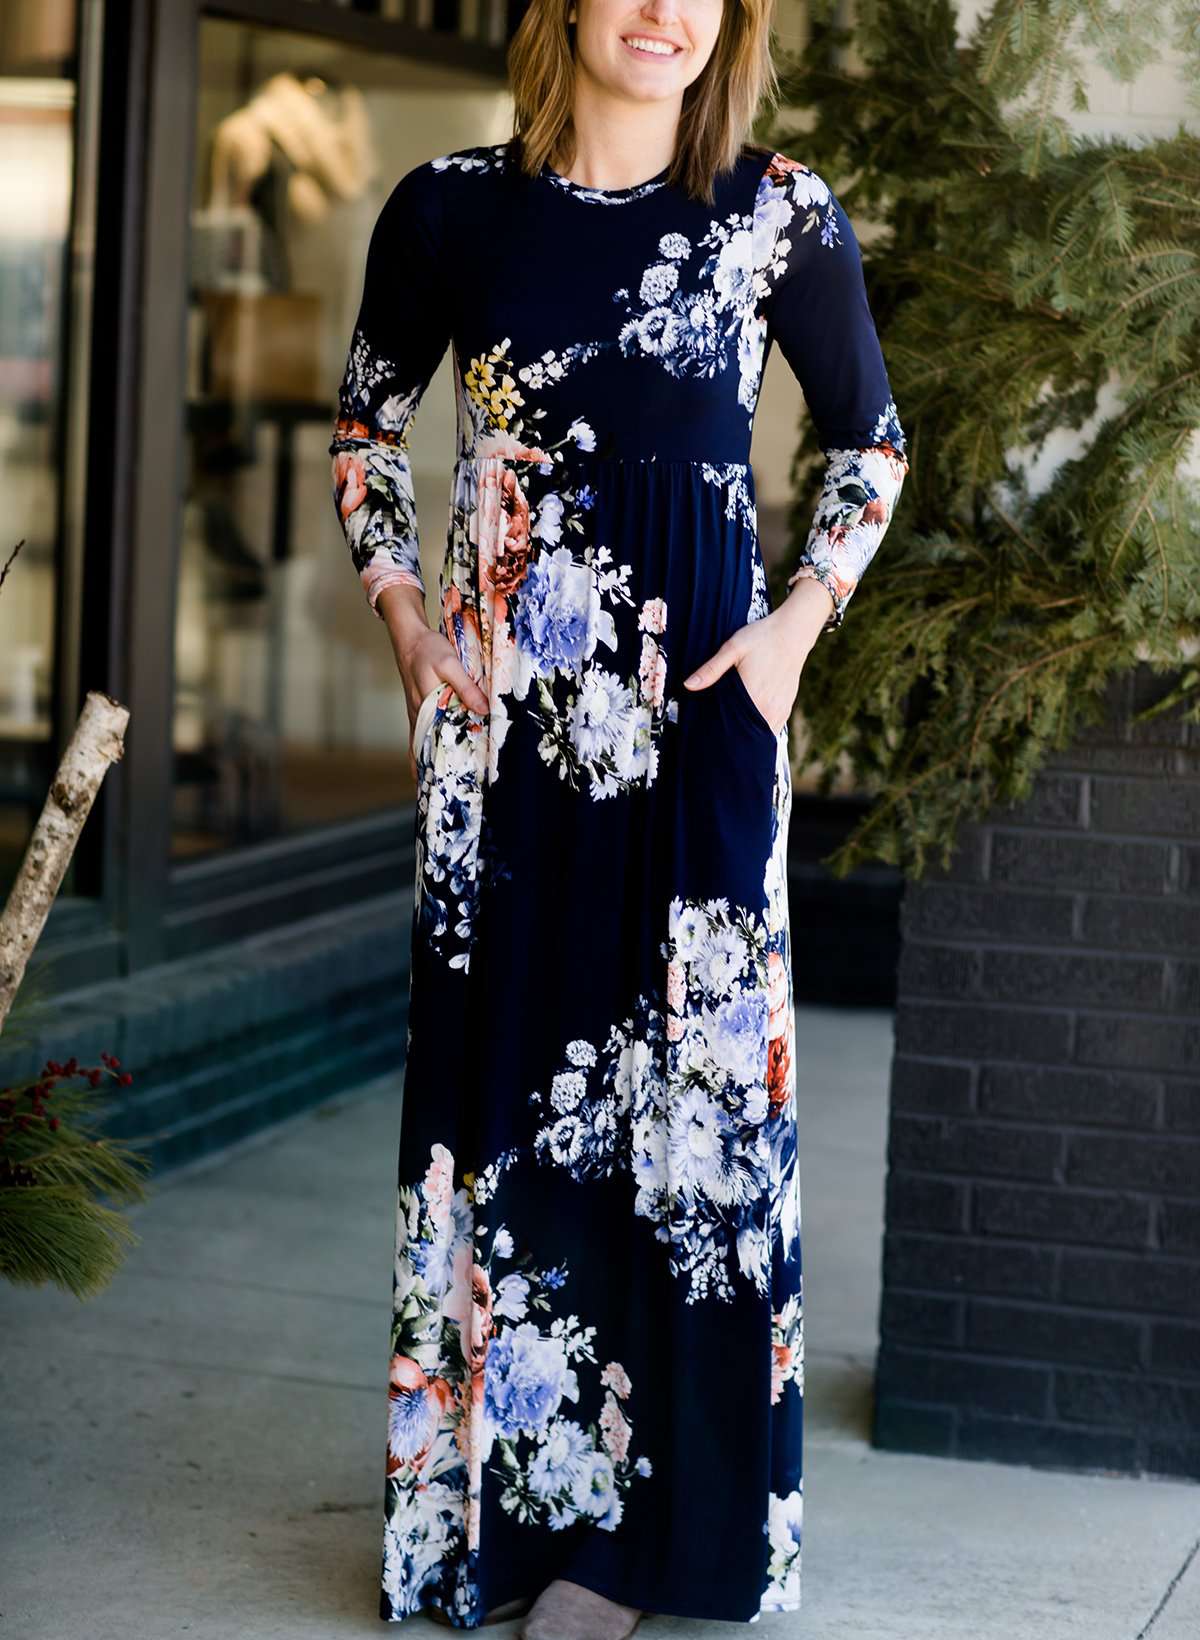 Woman wearing a modest, plum and navy maxi dress that has a elegant, floral print.